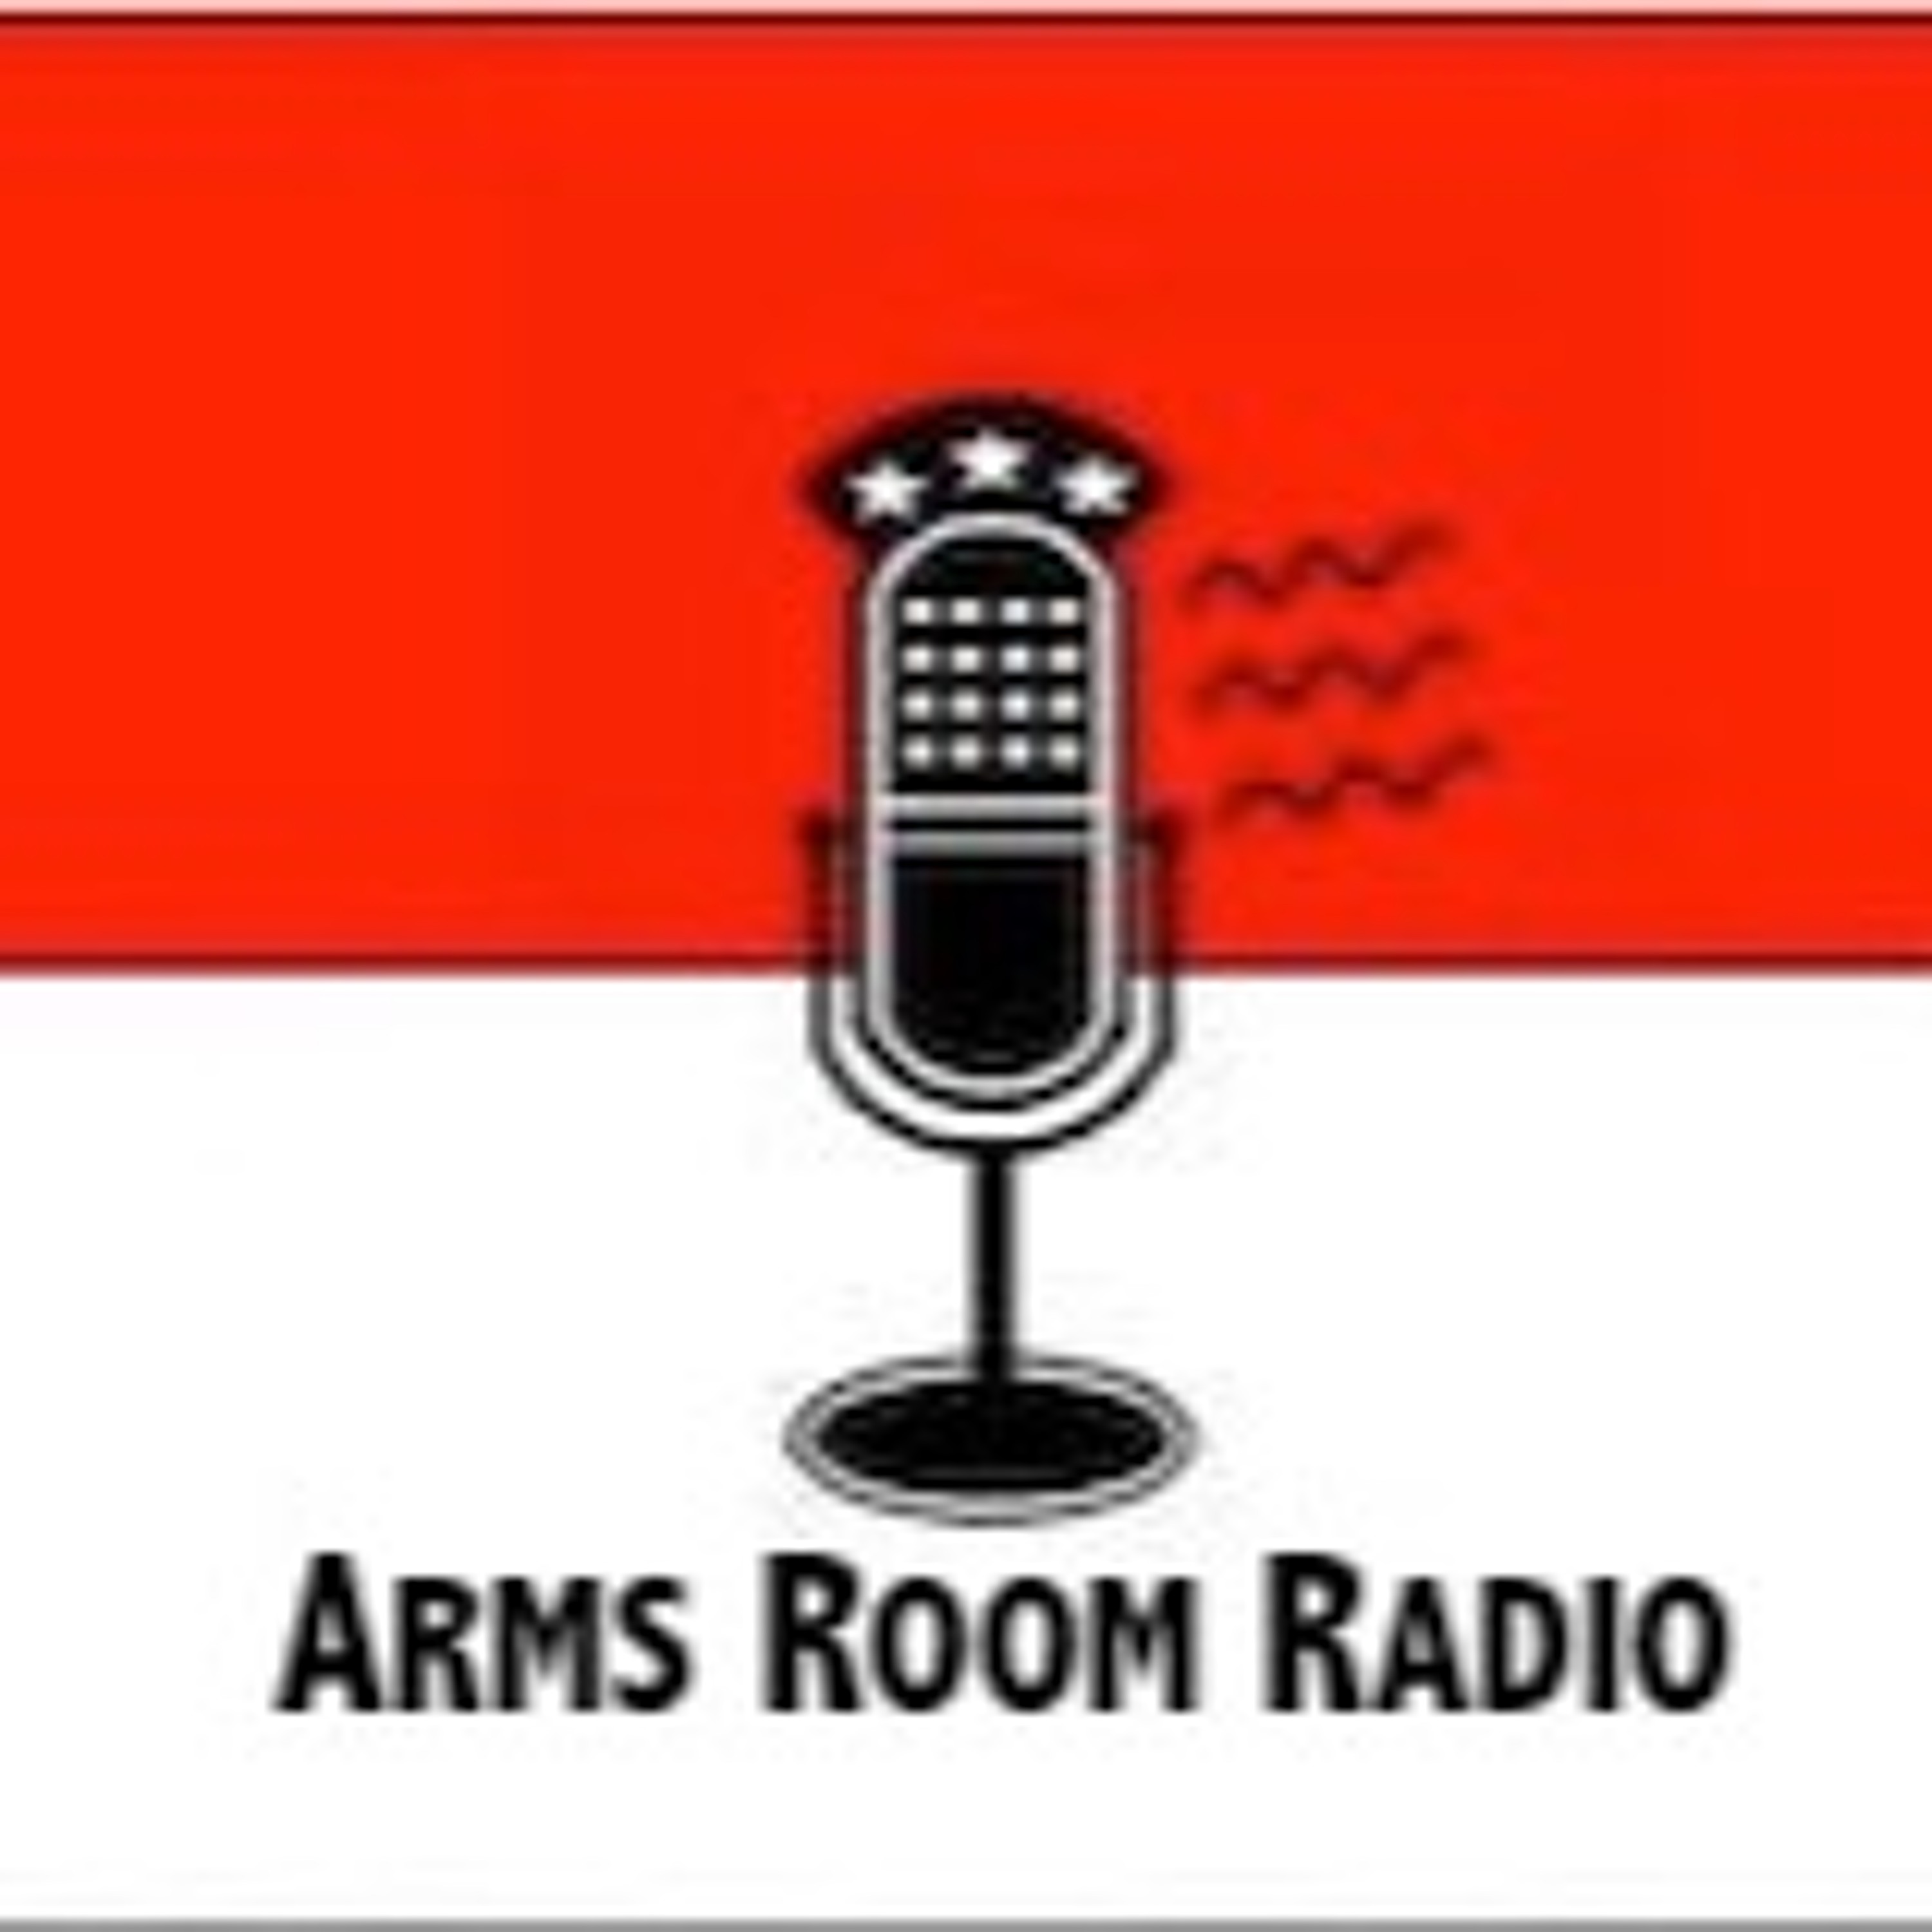 ArmsRoomRadio 10.31.20 Mister Todd Fossey and Election Prep